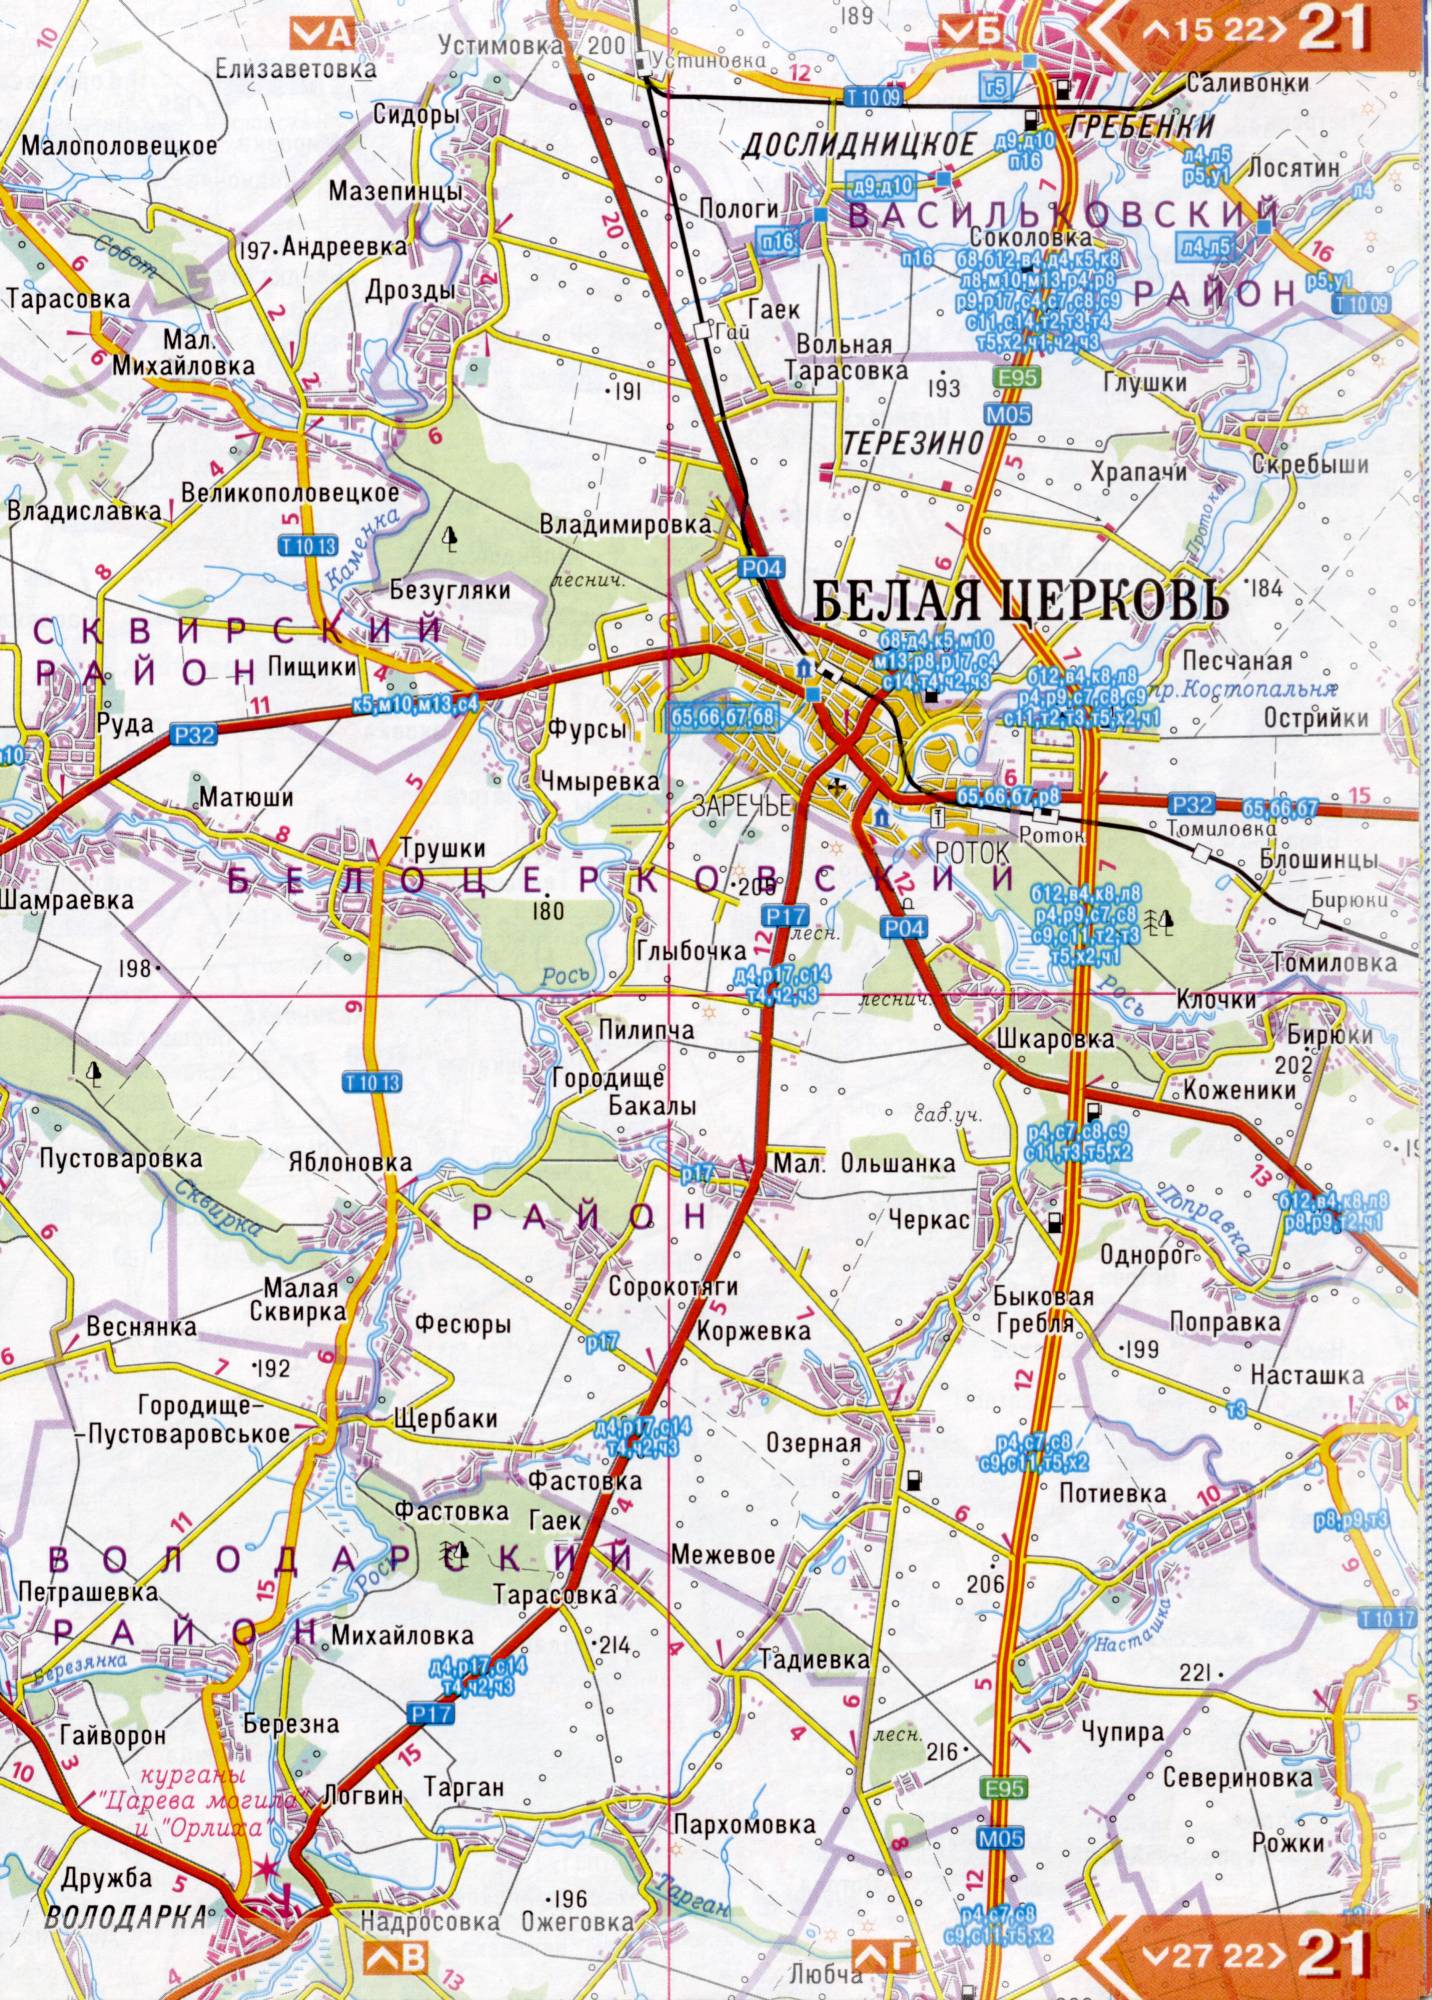 Atlas of the Kiev region. Detailed map of the Kiev region from the road atlas. Kiev region on a detailed map of scale 1cm = 3km. Free Download, B4